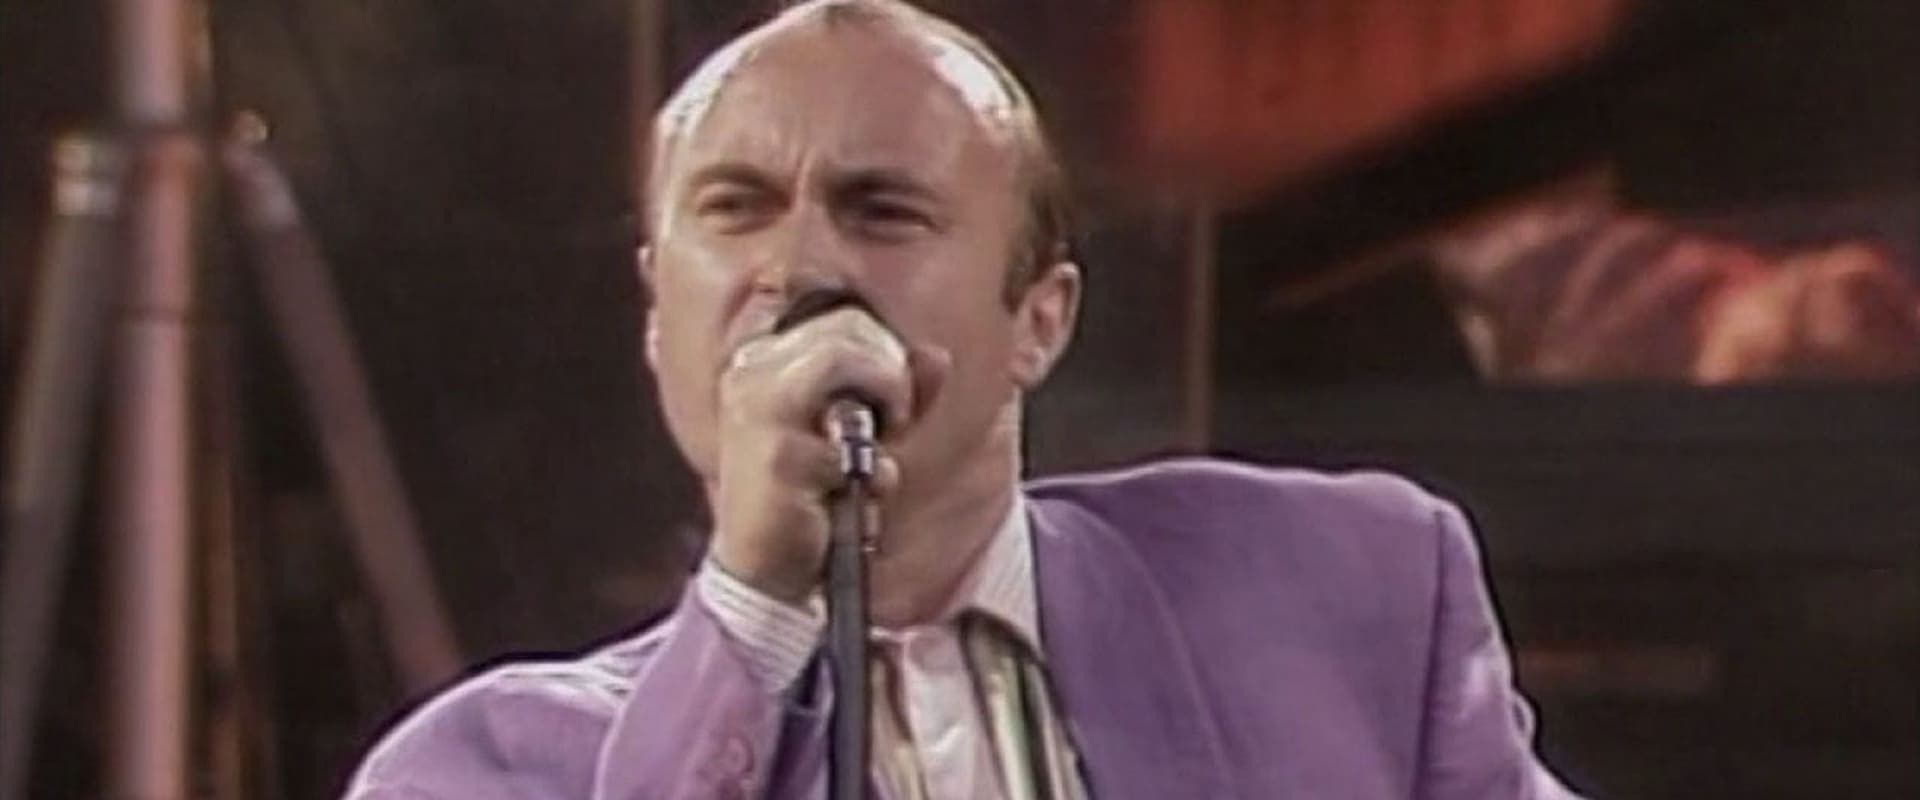 Phil Collins - Serious Hits Live